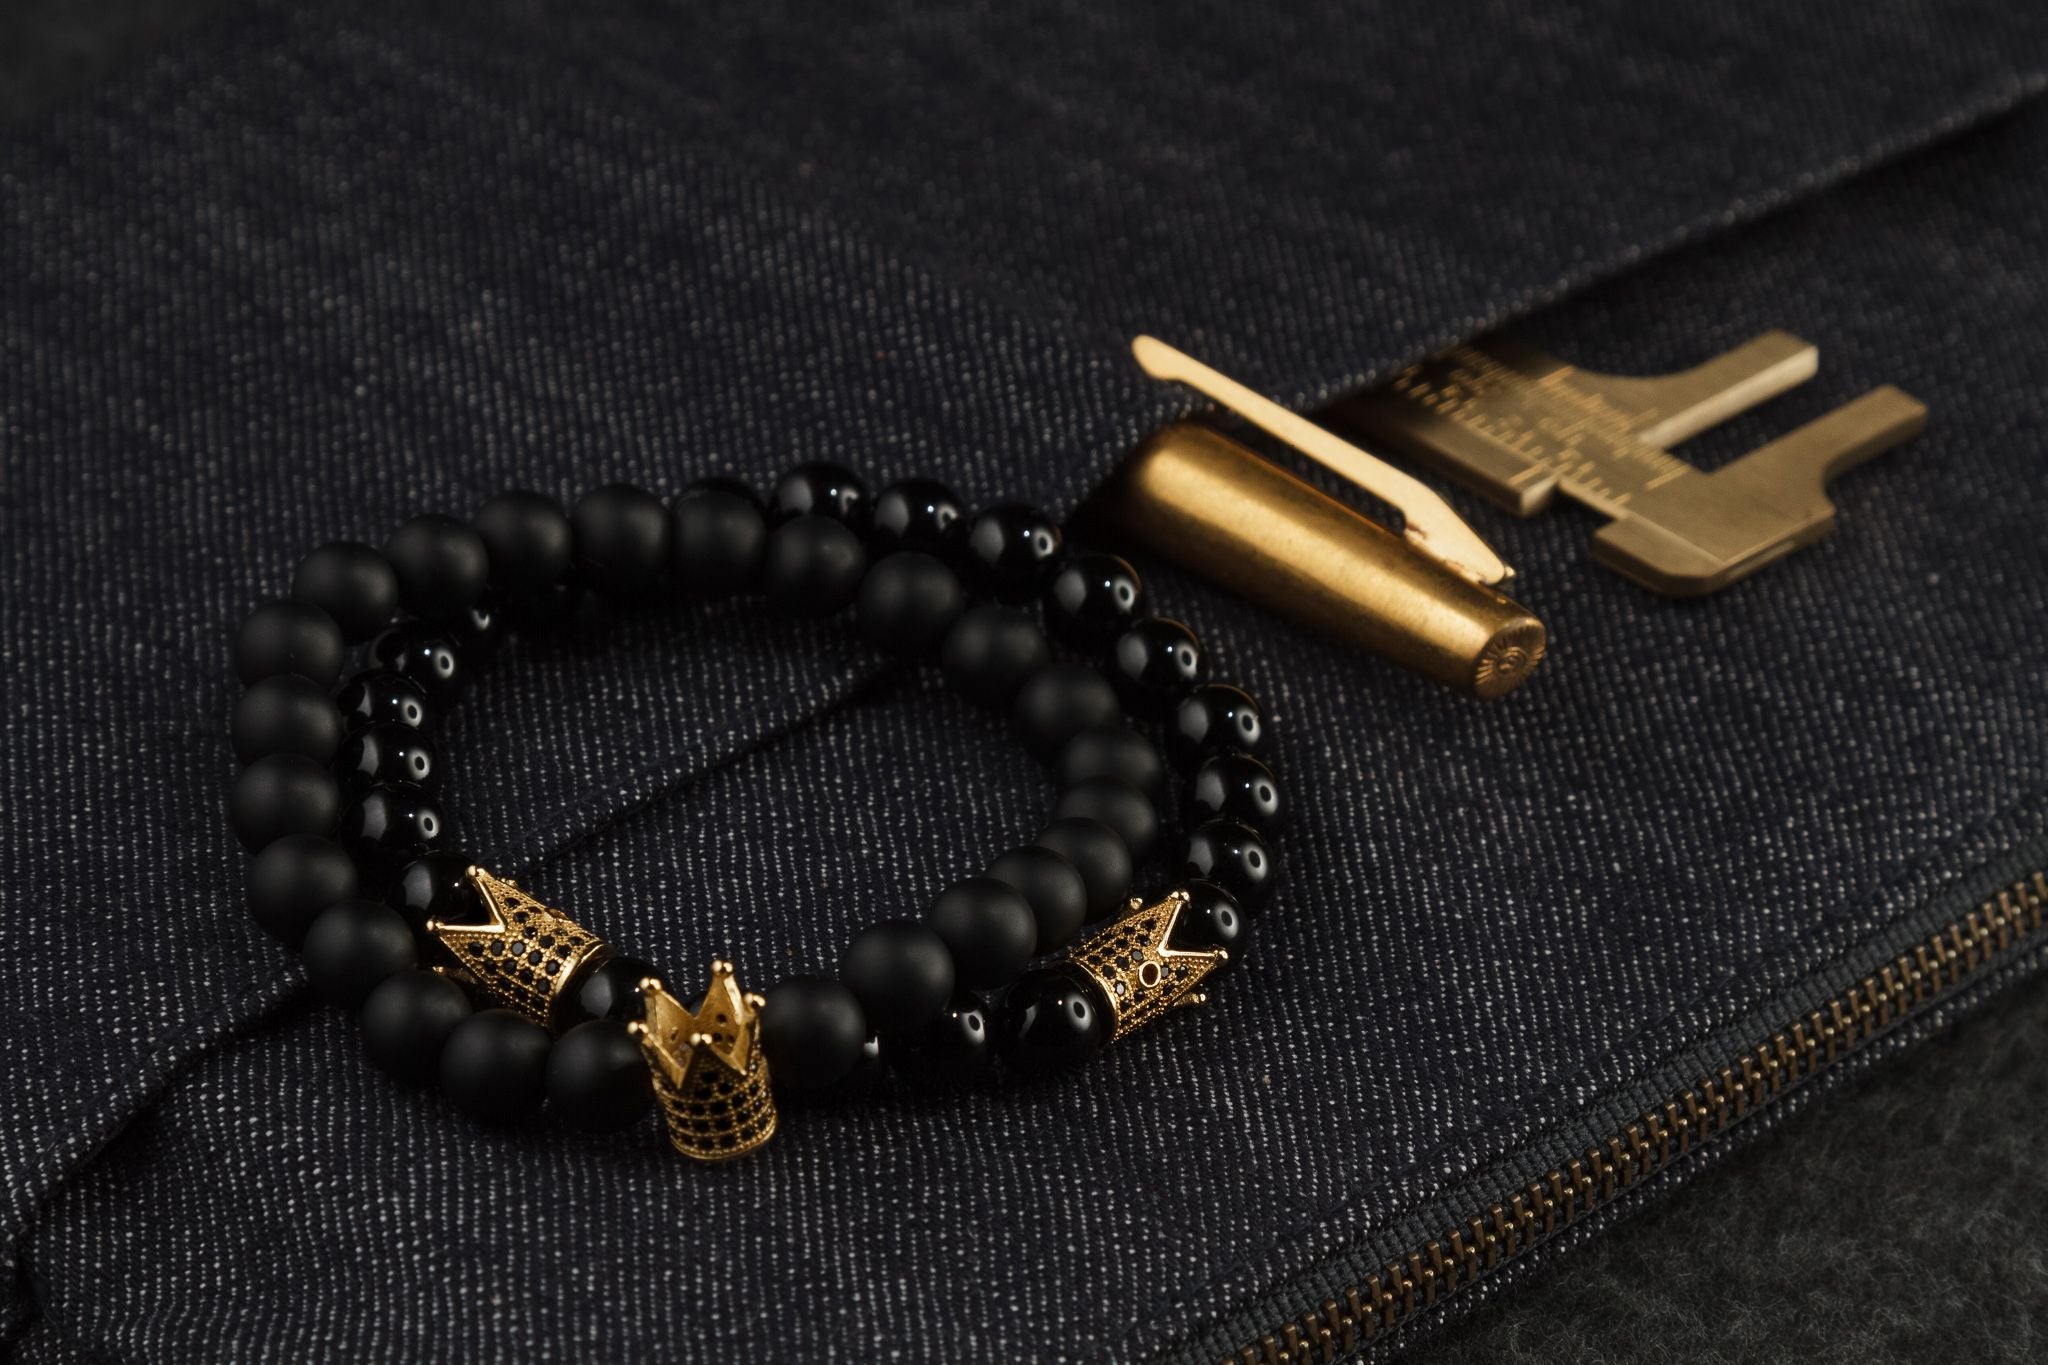 UNCOMMON Men's Beads Bracelet Two Gold Crown Charms Black Onyx Beads